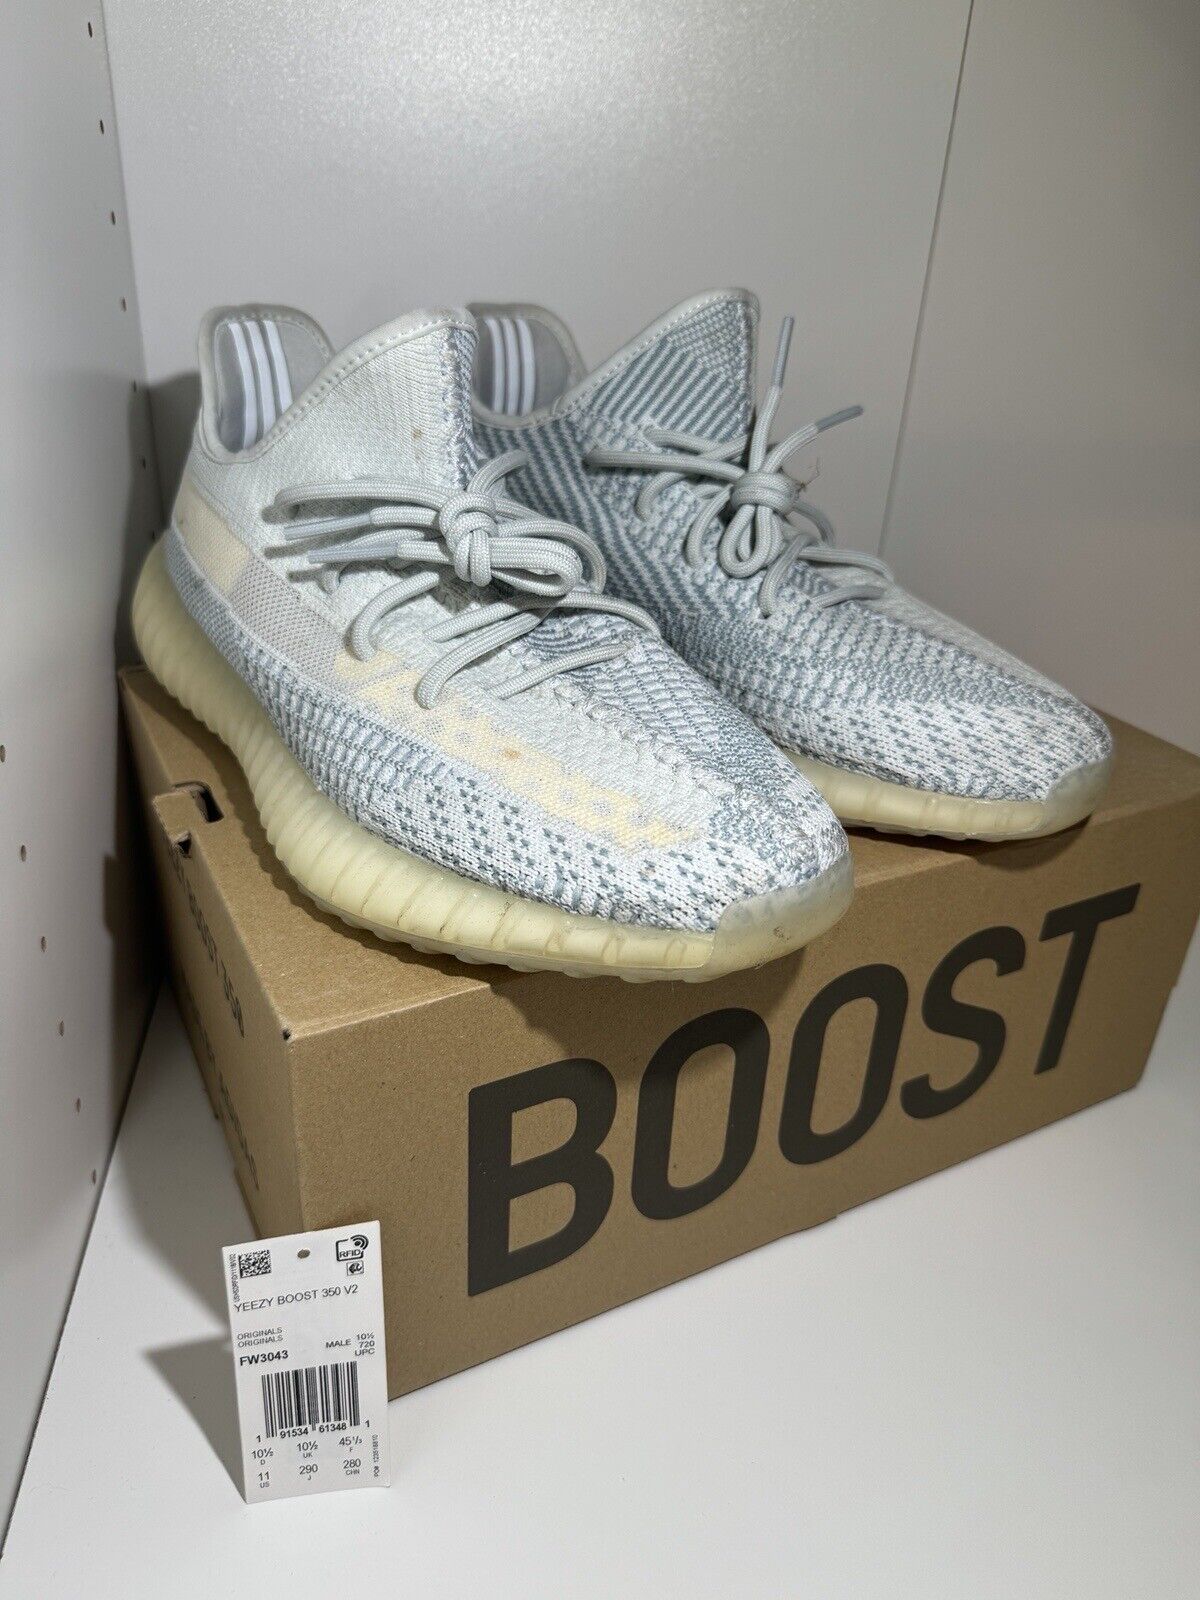 Size 11 - Adidas Yeezy Boost 350 V2 FW3043 Cloud White Non